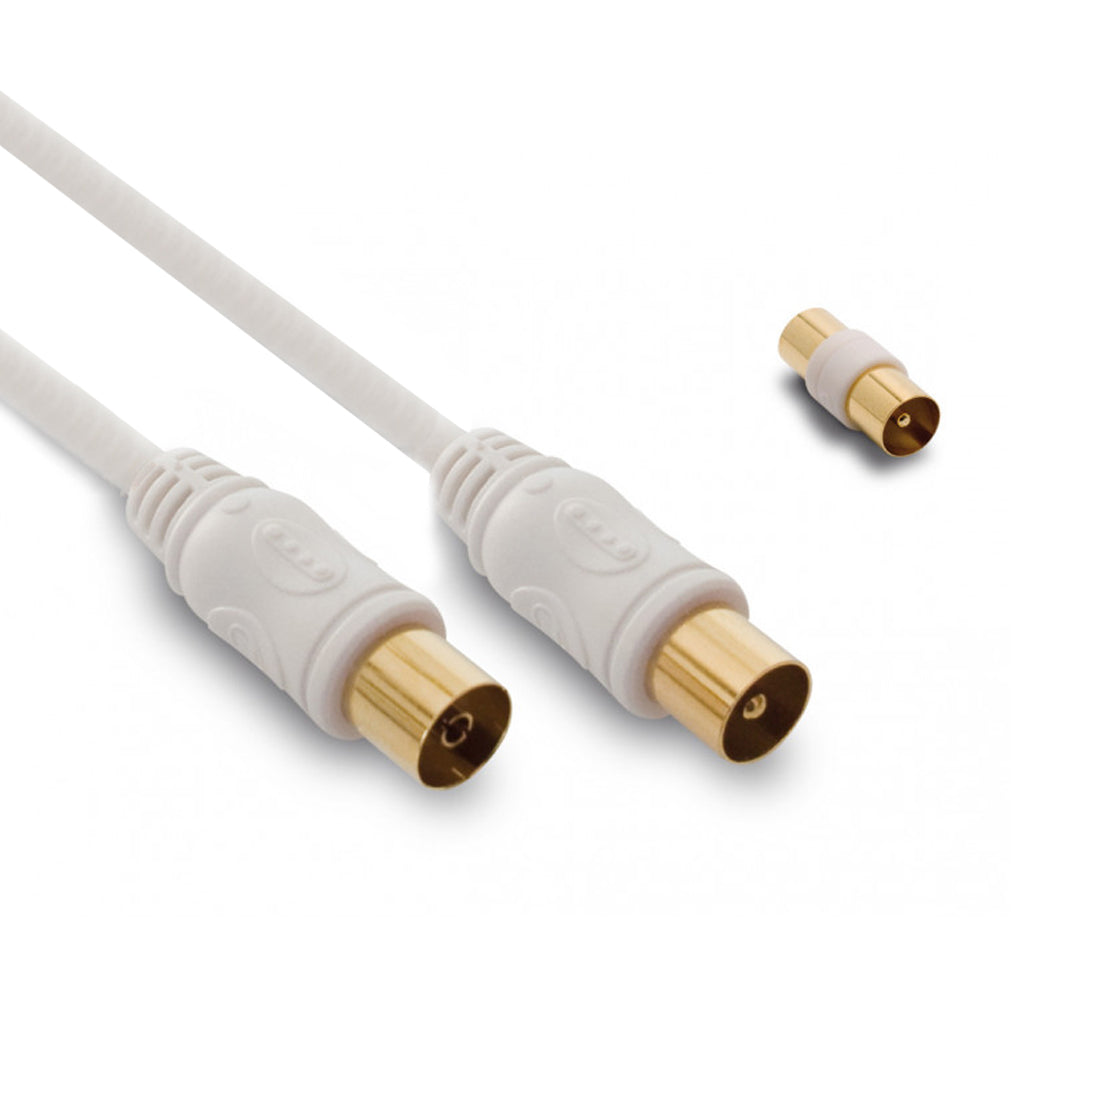 Metronic TV Coaxial Extension Cable + Adapter (M/F) White, TV Antenna Cable, 25m